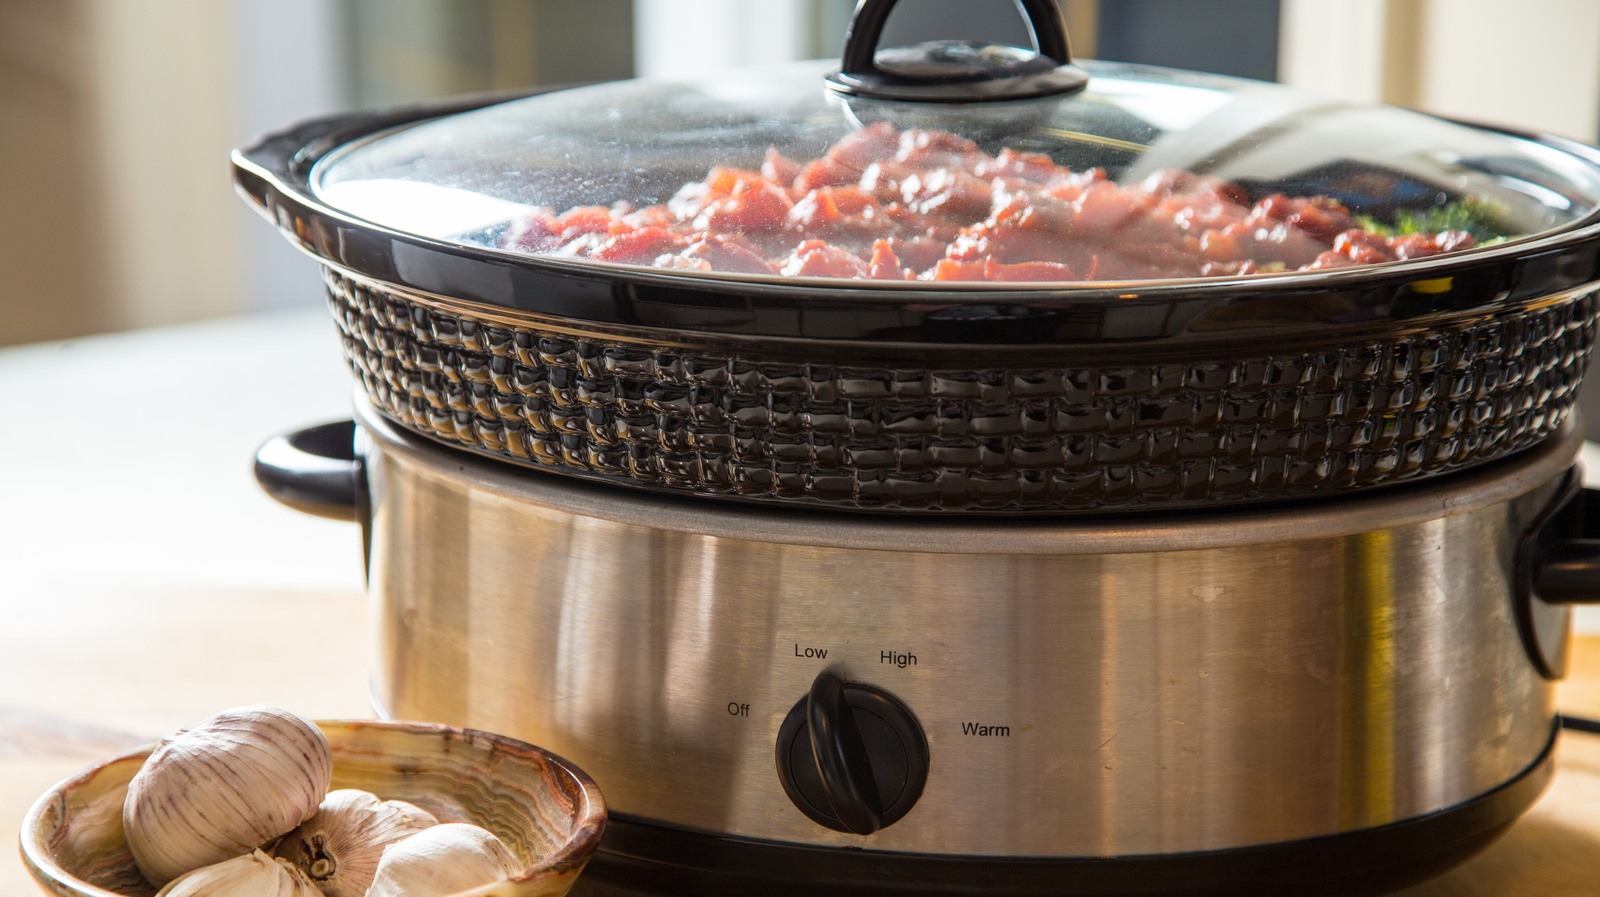 5 Essential Things You Should Know About Using Your Slow Cooker